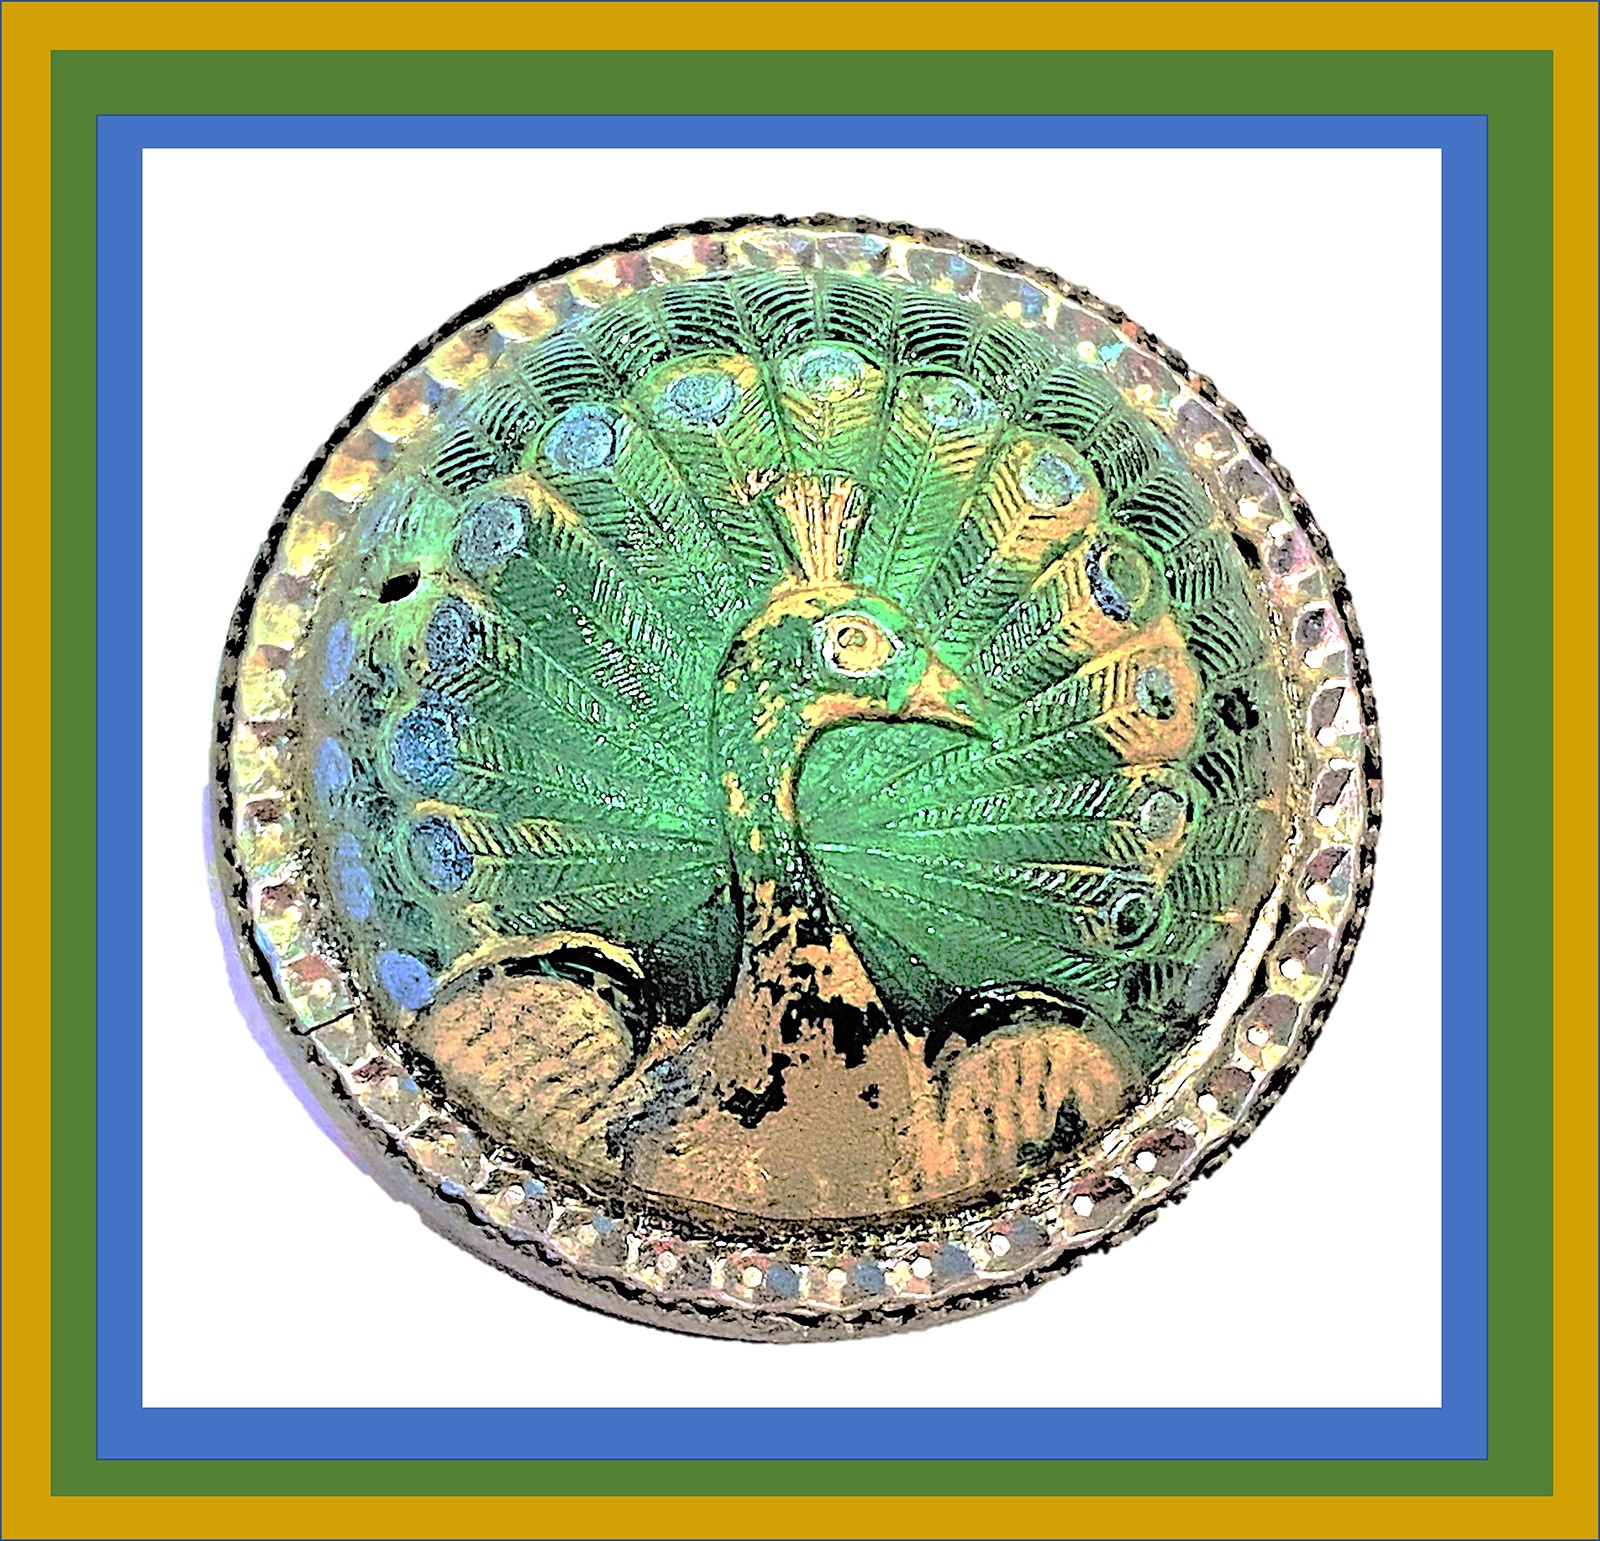 Unusual high domed glass peacock in metal button